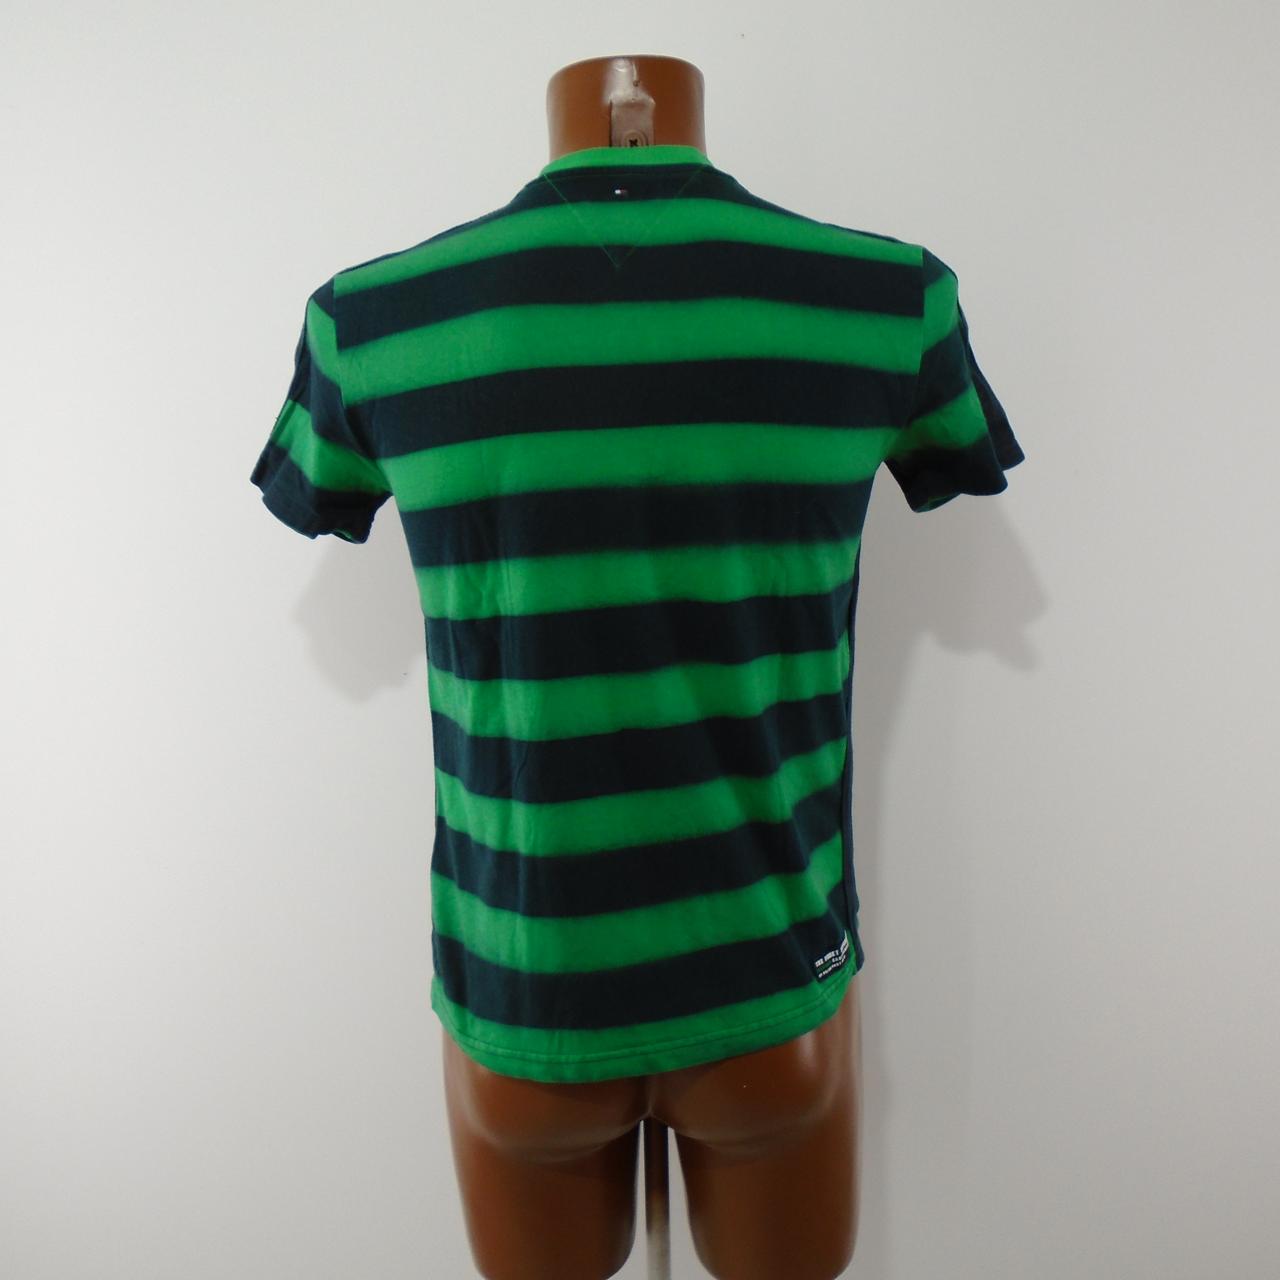 Men's T-Shirt Tommy Hilfiger. Green. XS. Used. Good